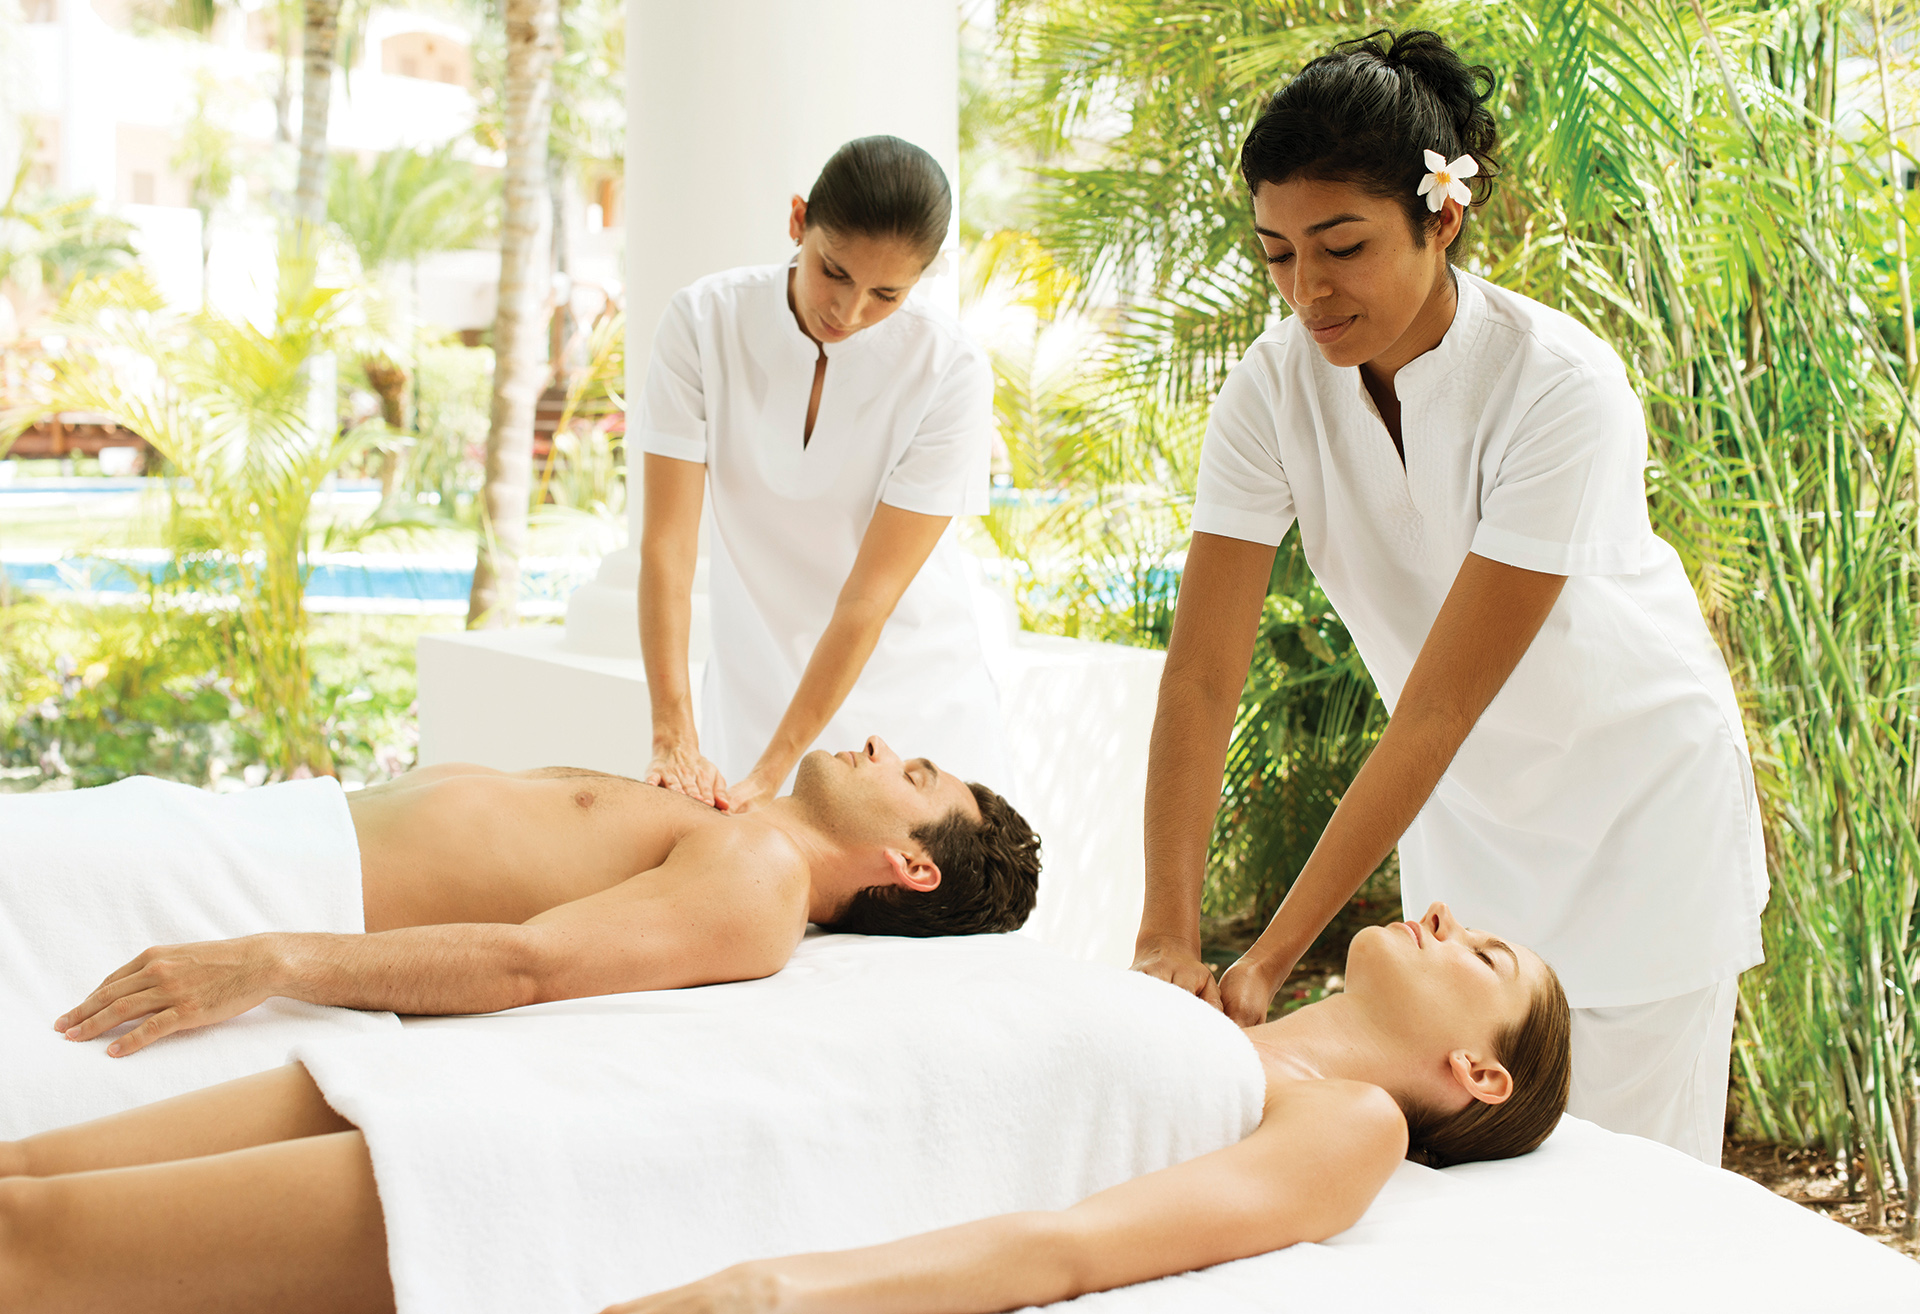 Pampering guests in the spa of our hotels and resorts